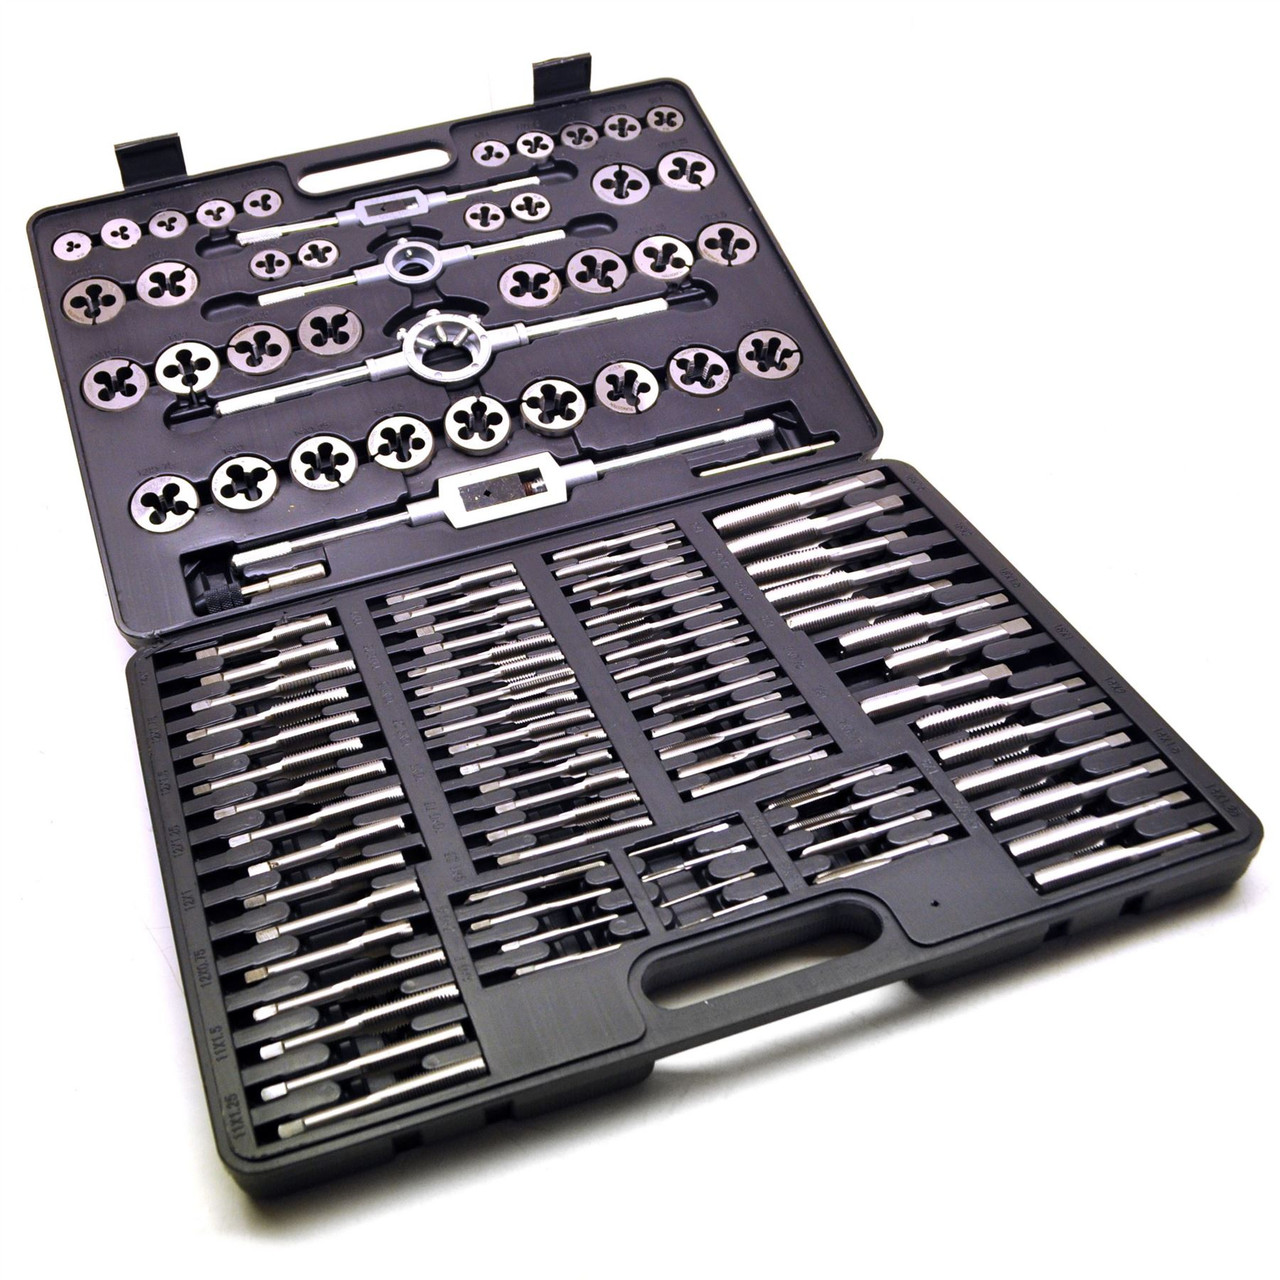 Metric tap and die set by US Pro 110pc (Tungsten) AT226 AB Tools Online